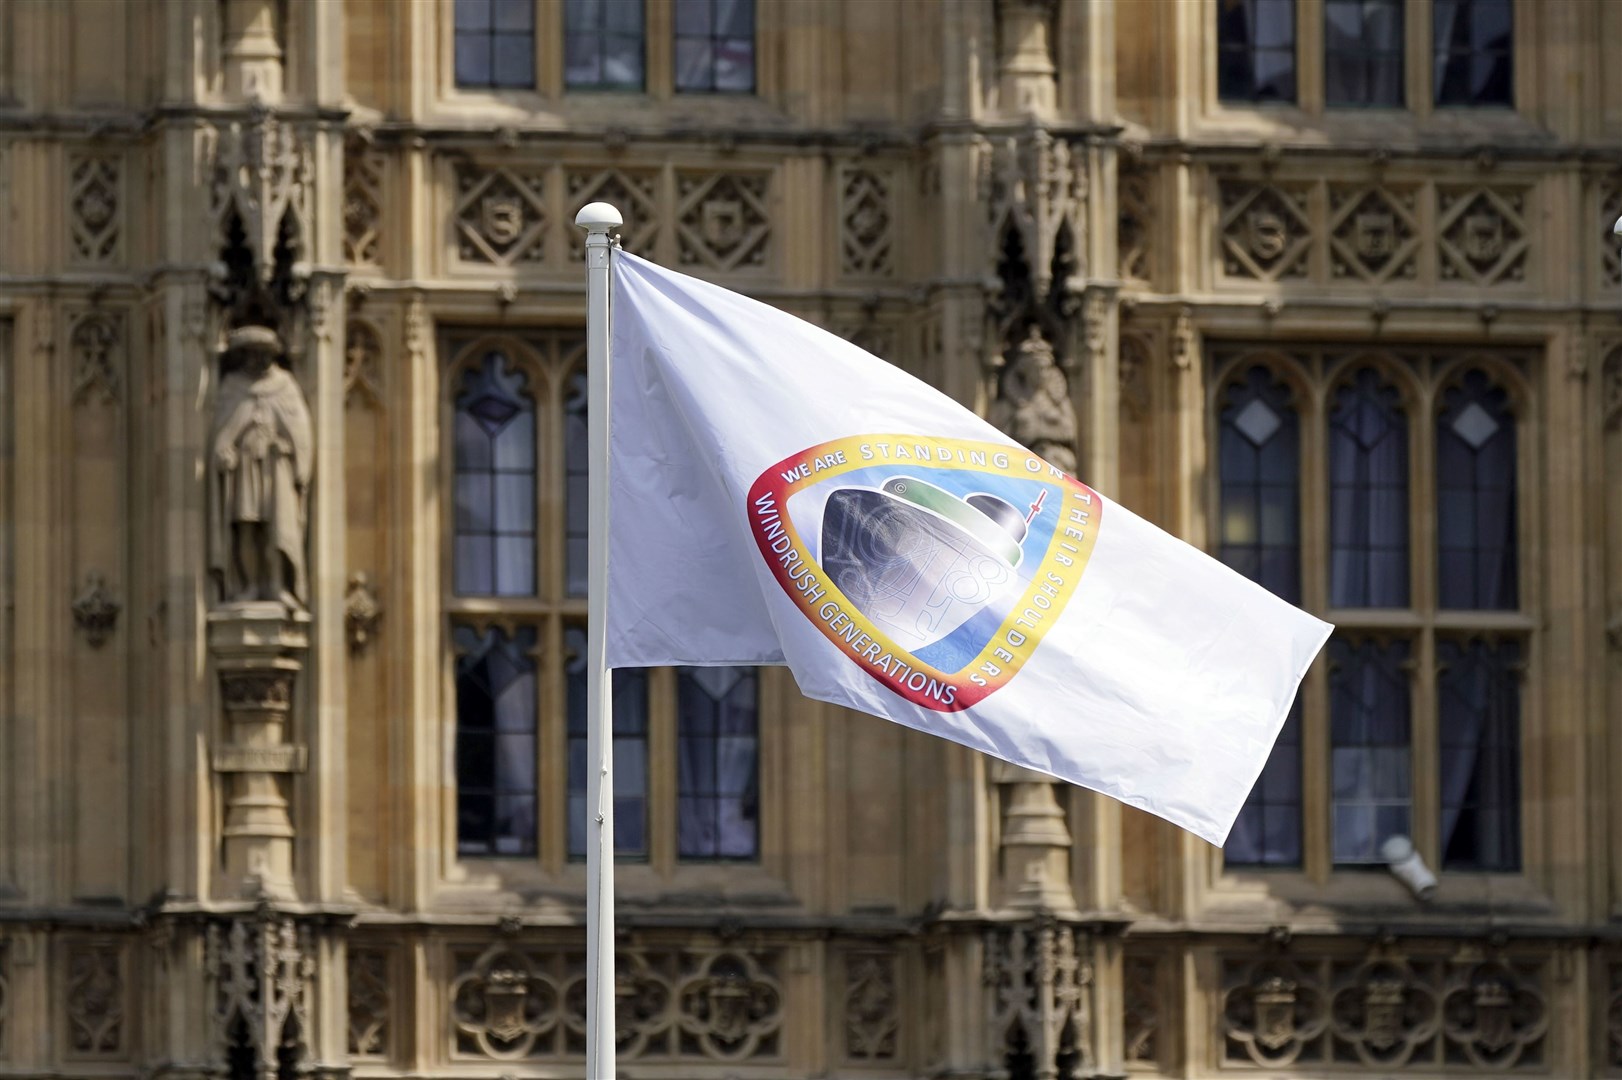 The Windrush flag flies at the Houses of Parliament in London (Aaron Chown/PA)